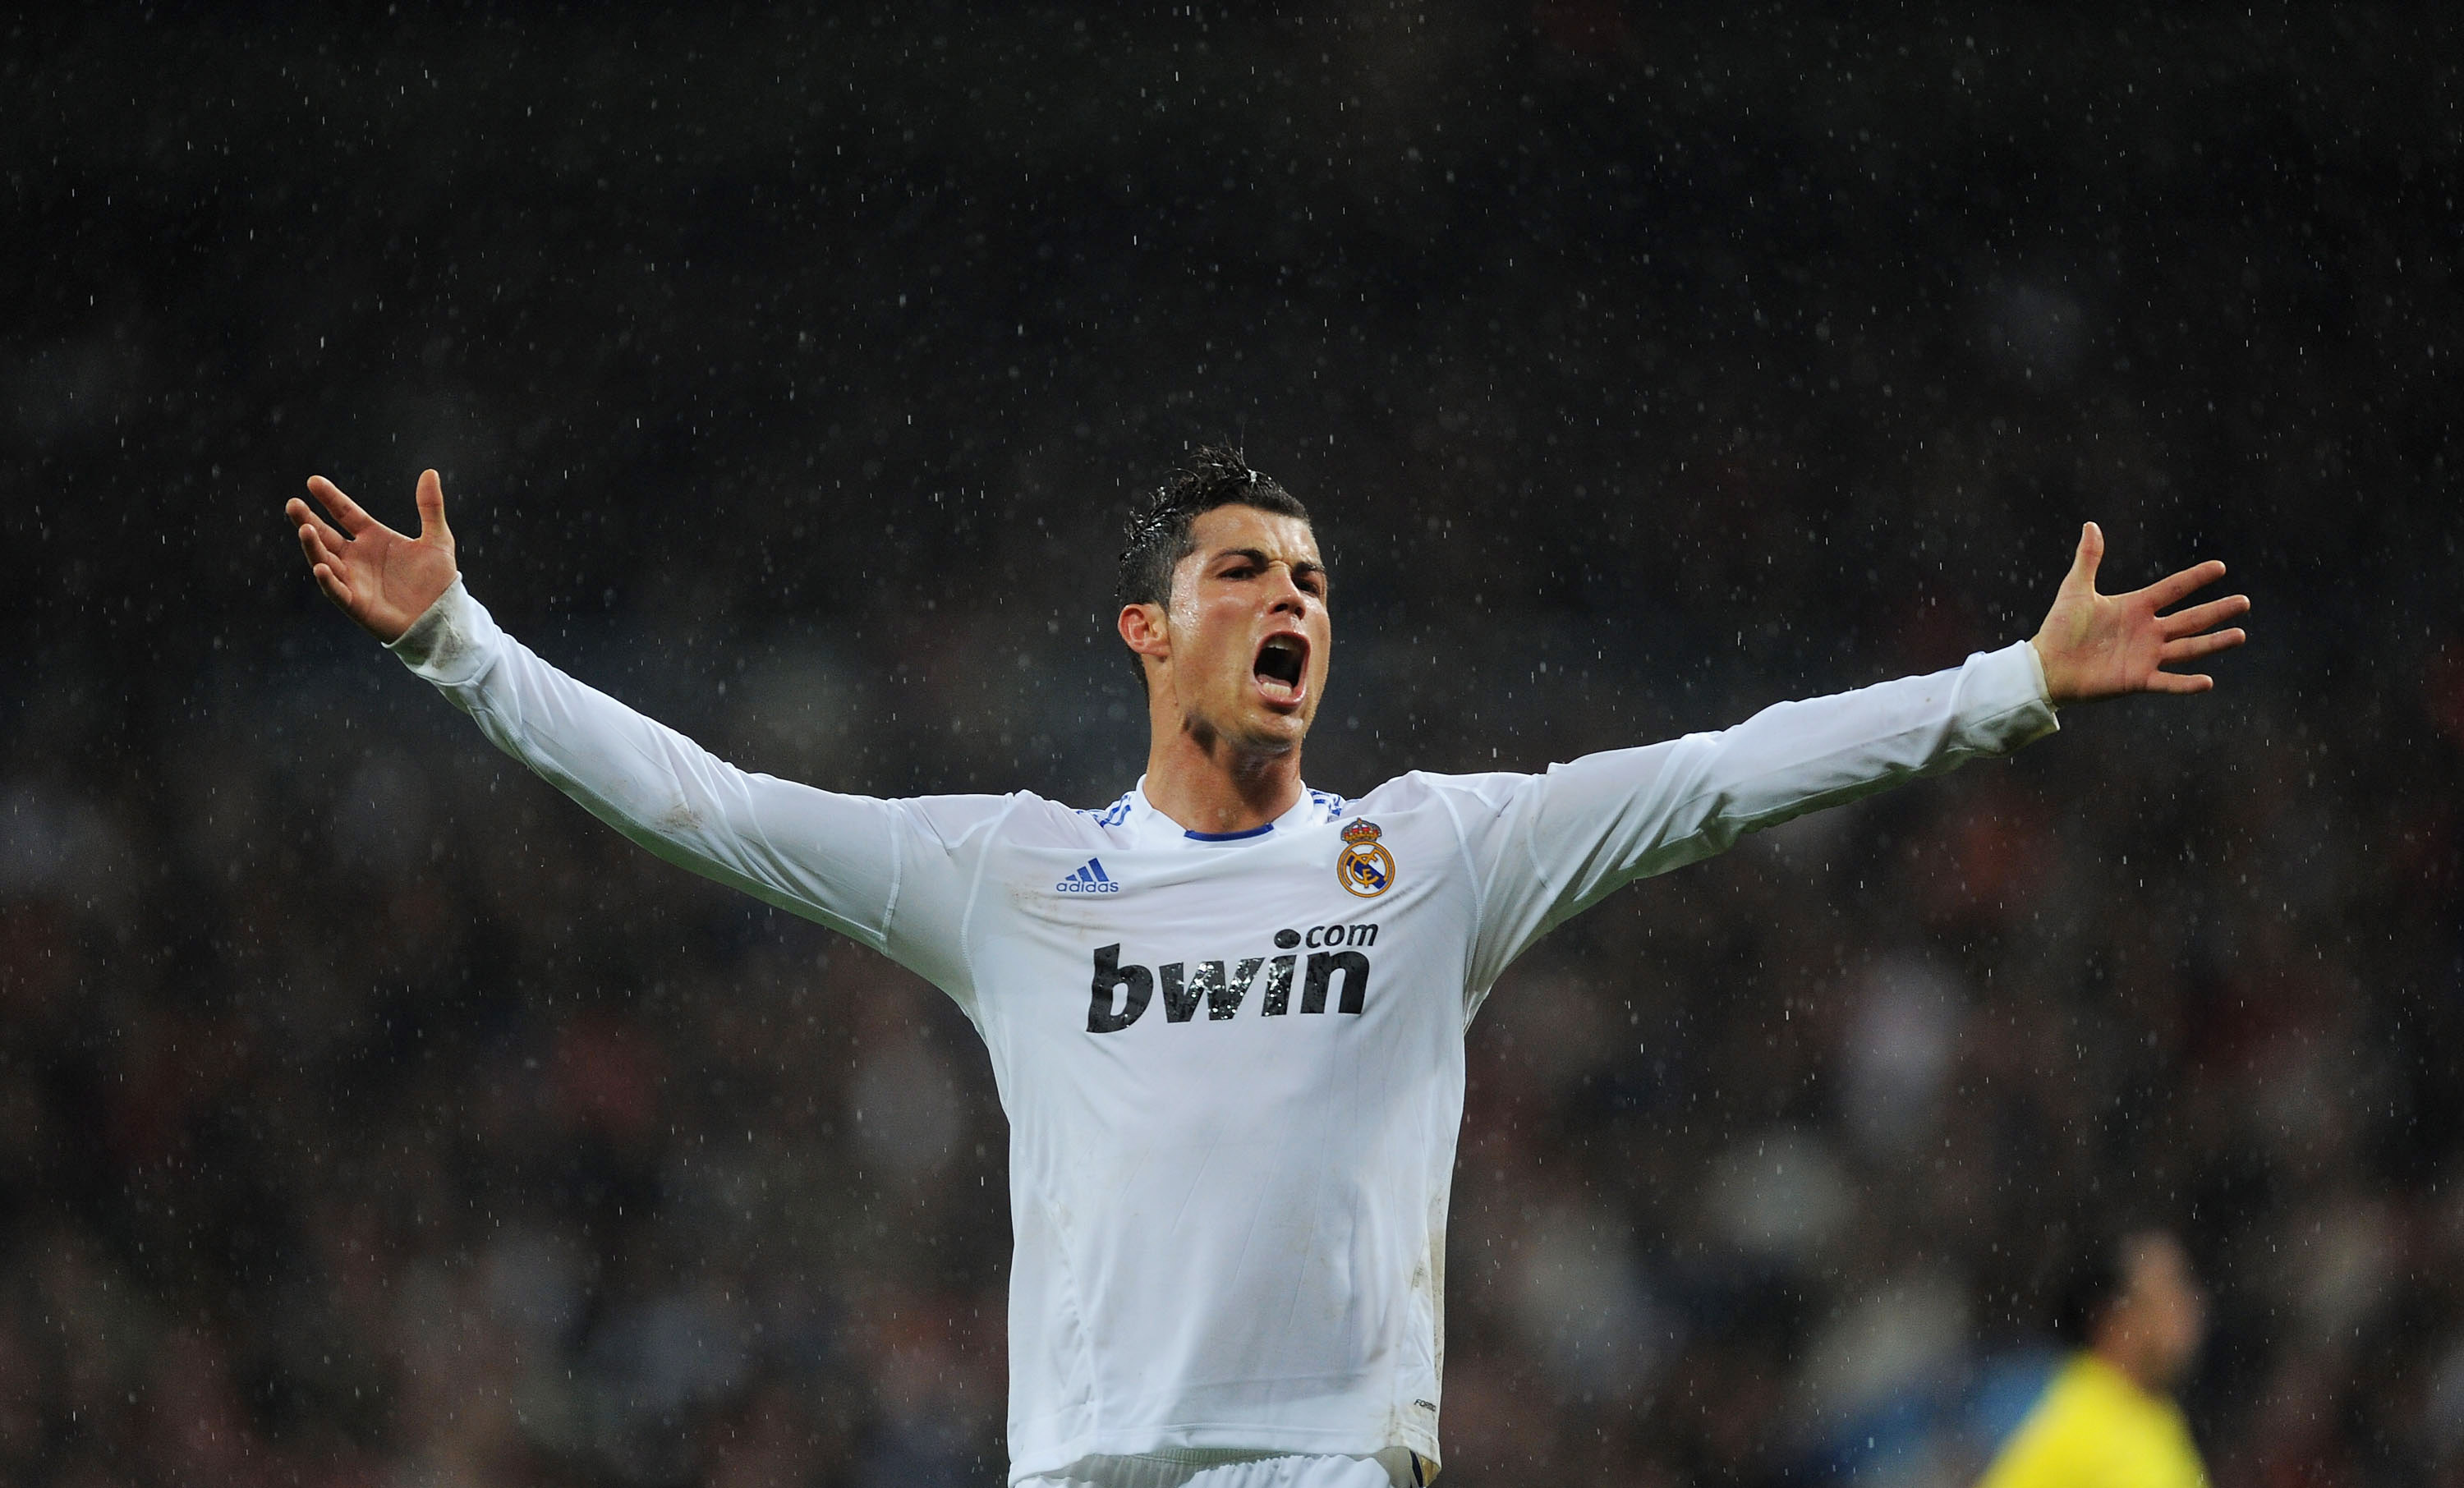 MADRID, SPAIN - FEBRUARY 19: Cristiano Ronaldo of Real Madrid reacts during the  La Liga match between Real Madrid and Levante at Estadio Santiago Bernabeu on February 19, 2011 in Madrid, Spain.  (Photo by Denis Doyle/Getty Images)